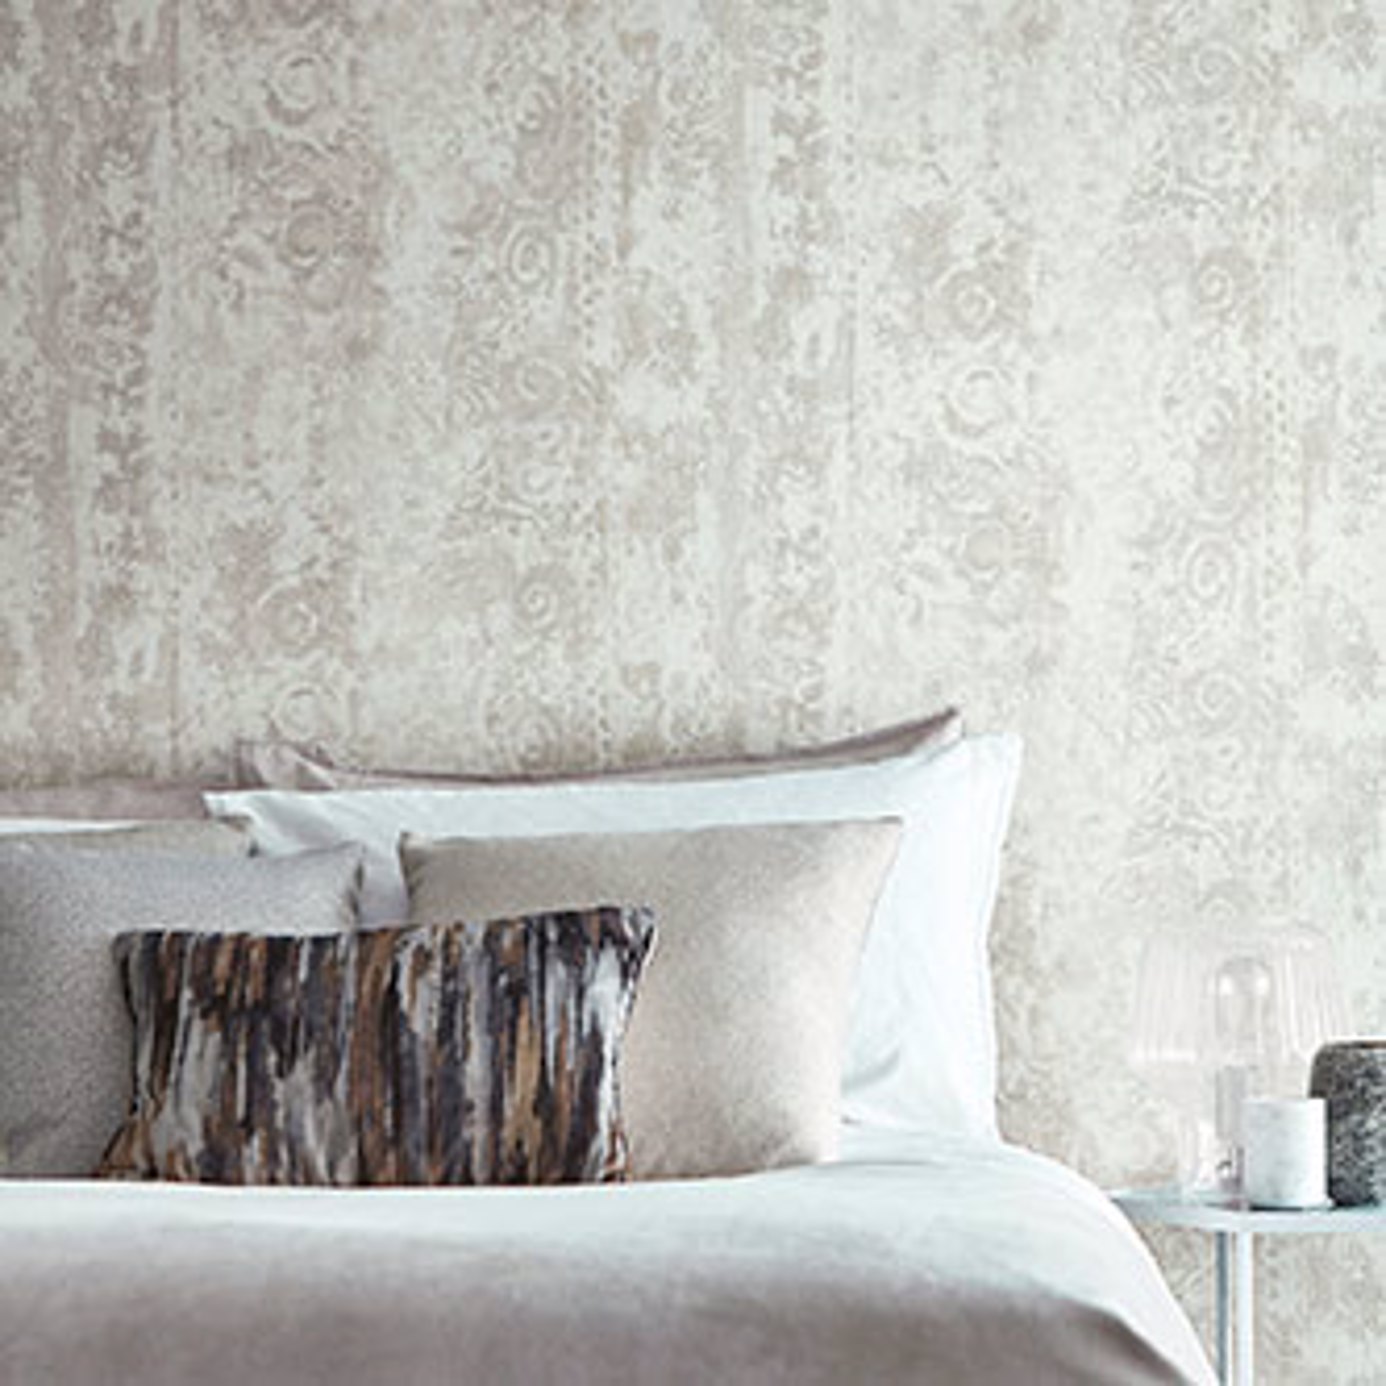 Anthology Pozzolana Pumice Wallpaper by HAR